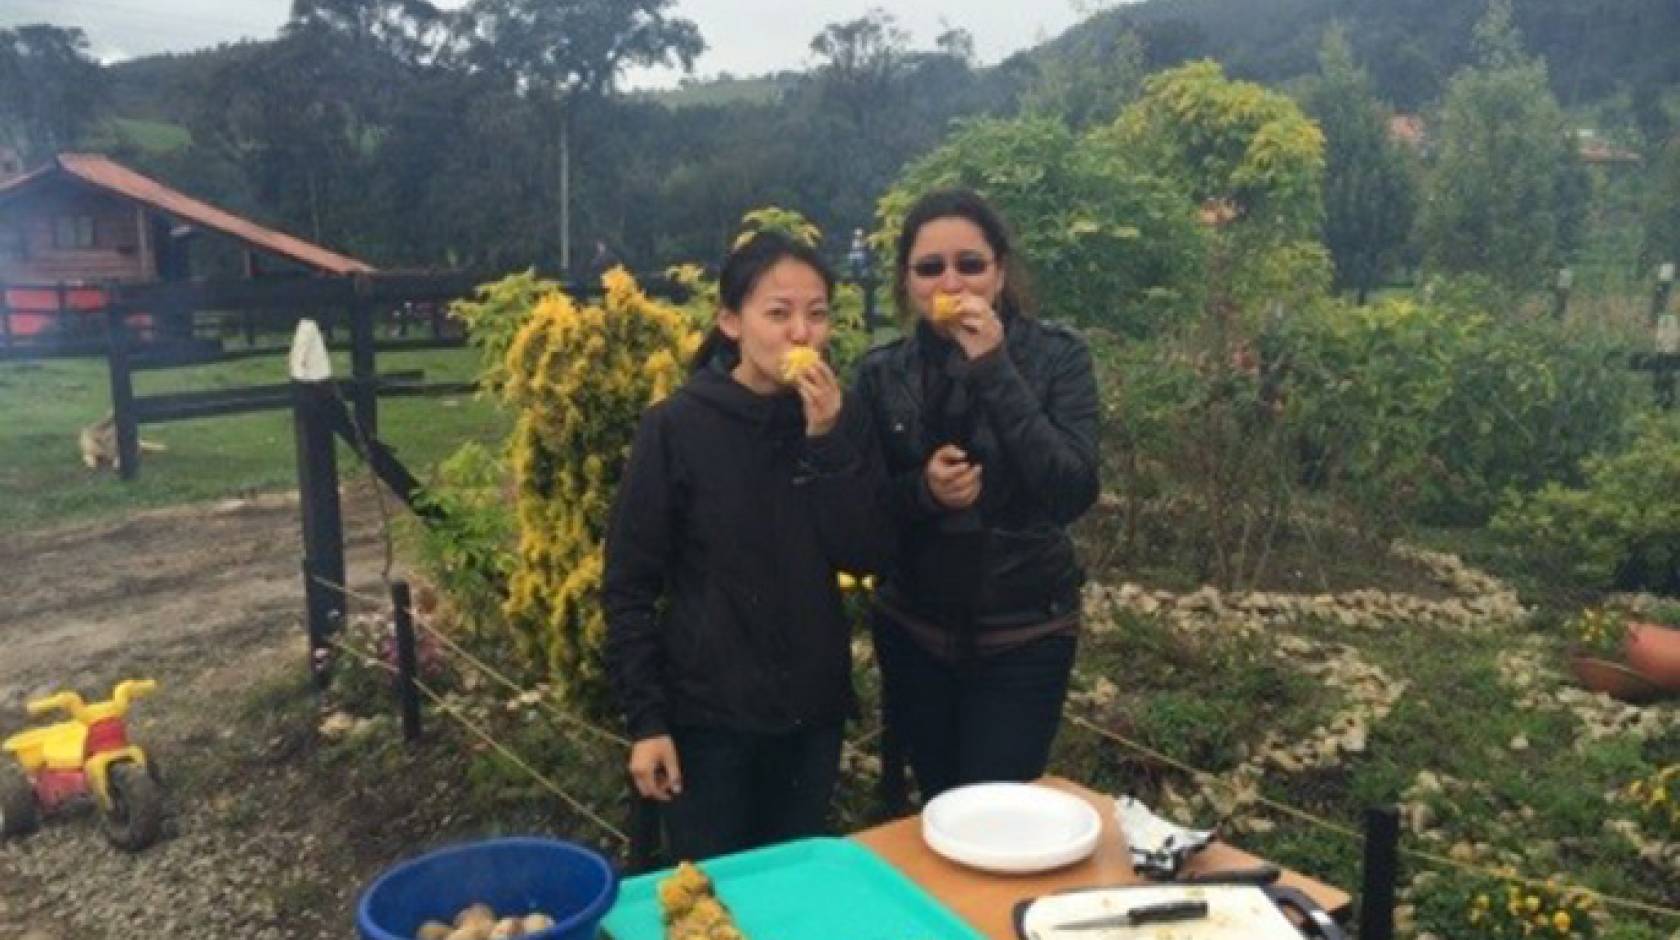 Meiling Gao (left), a 2015 USAID fellow from UC Berkeley with Juliana Hernández in Colombia